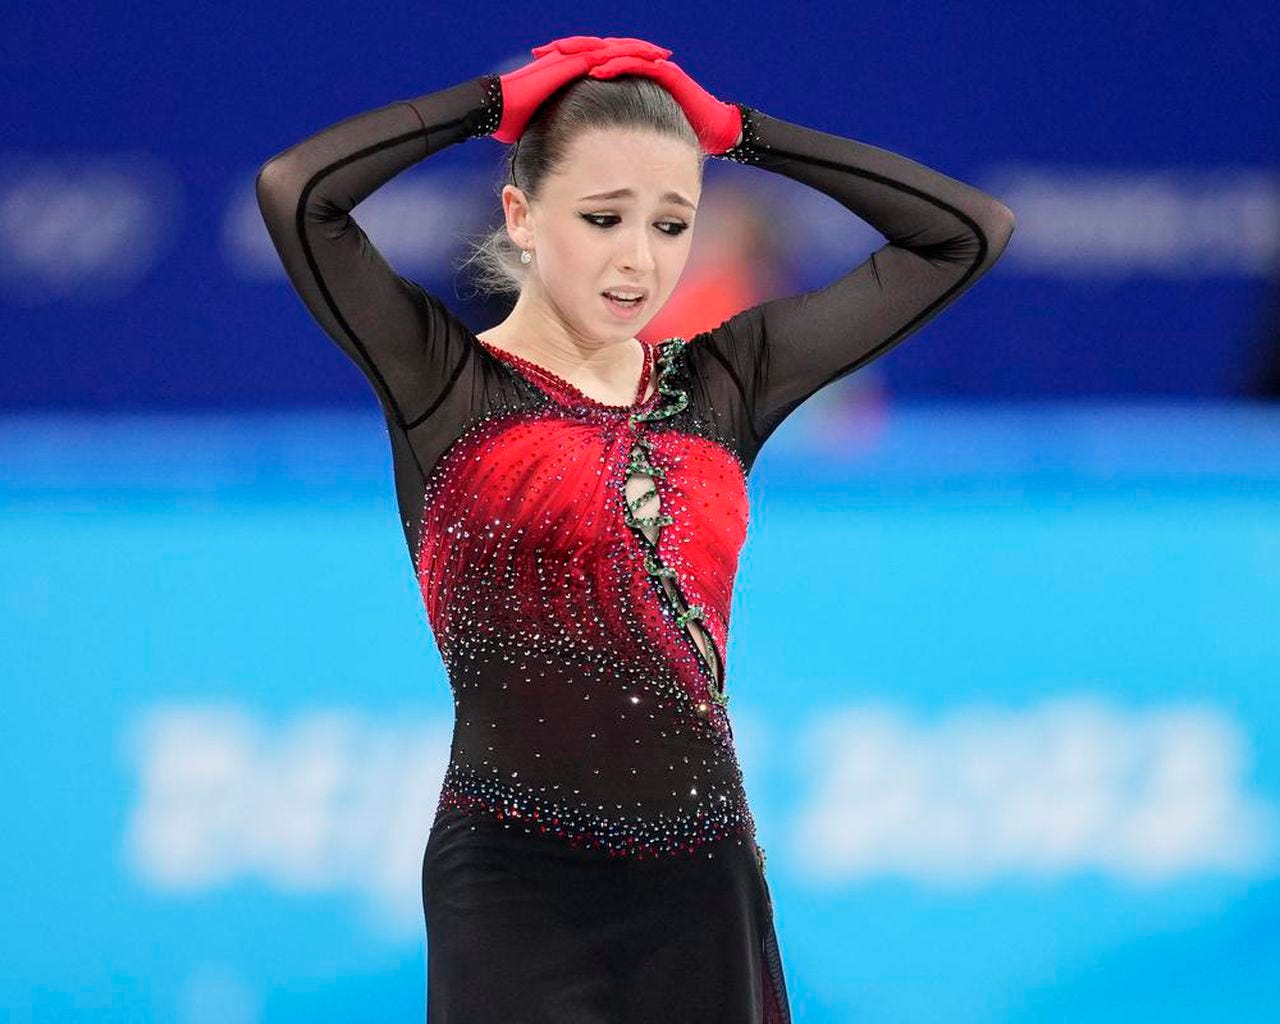 Olympic figure skating's issues run much deeper than the Valieva